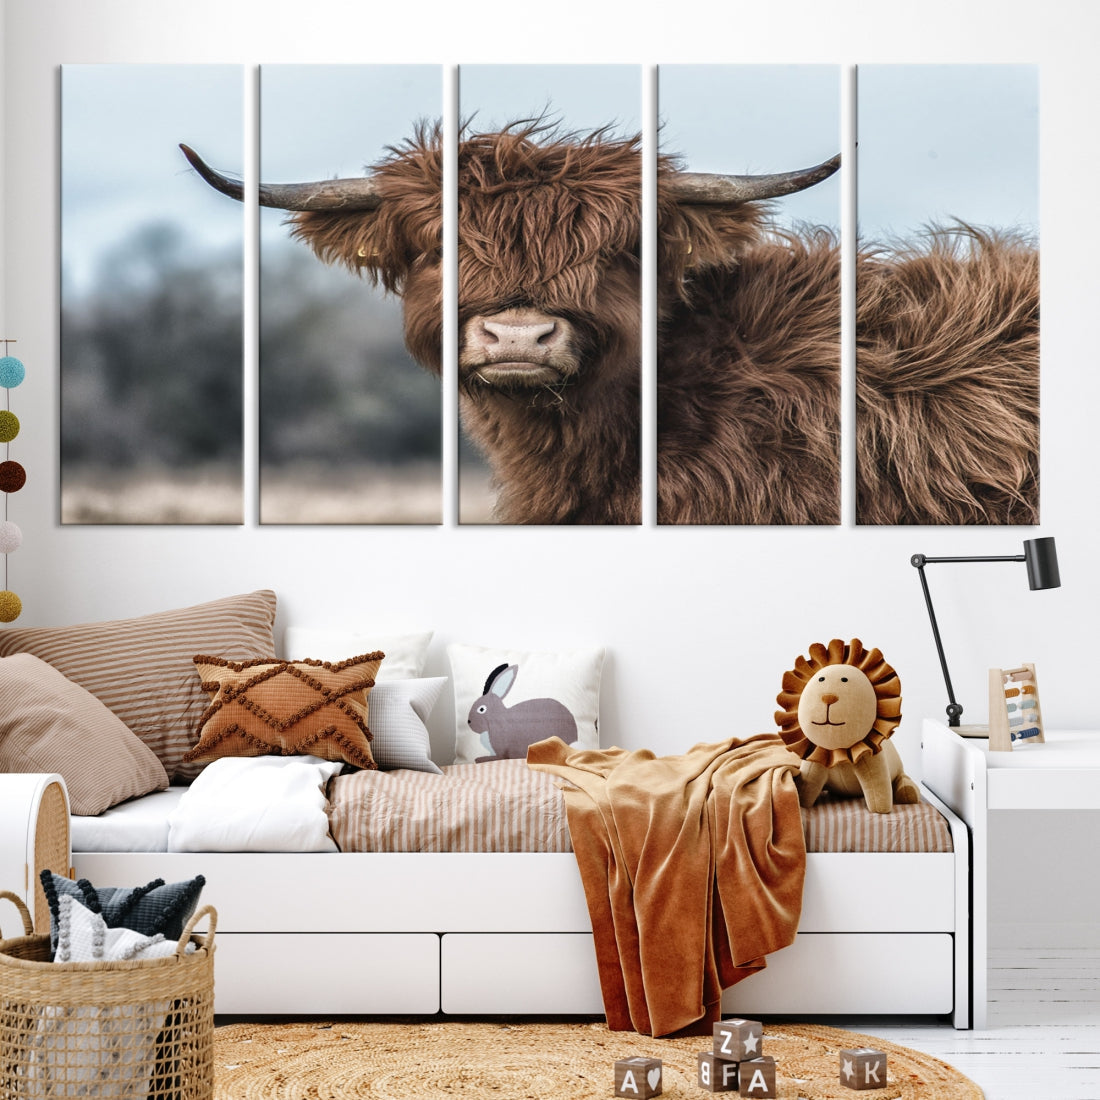 Cute Highland Cow Canvas Wall Art Print Large Animal Picture Wall Decor